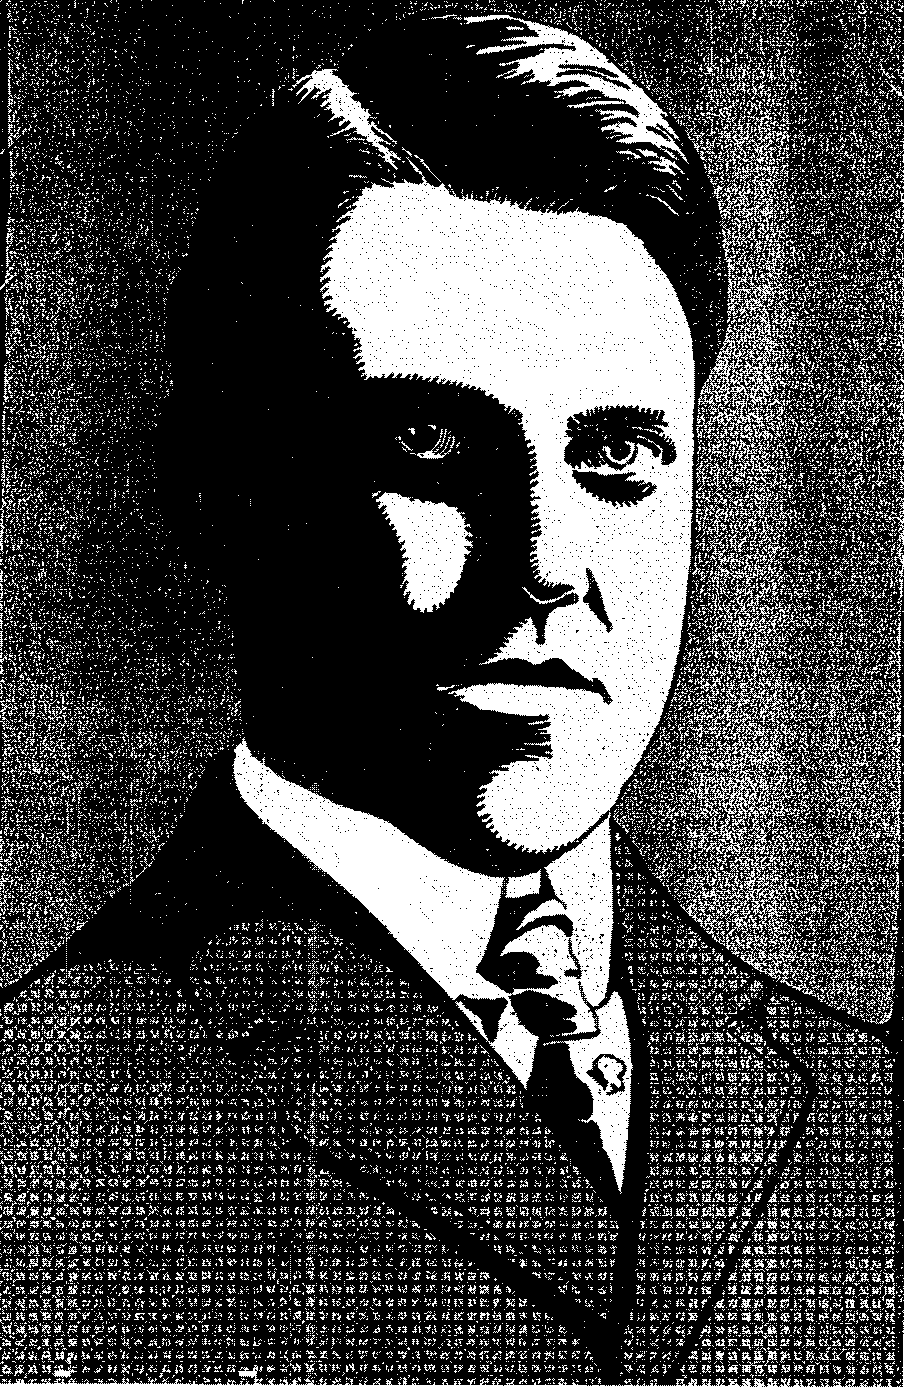 Black & White image of Clifford G. Roe